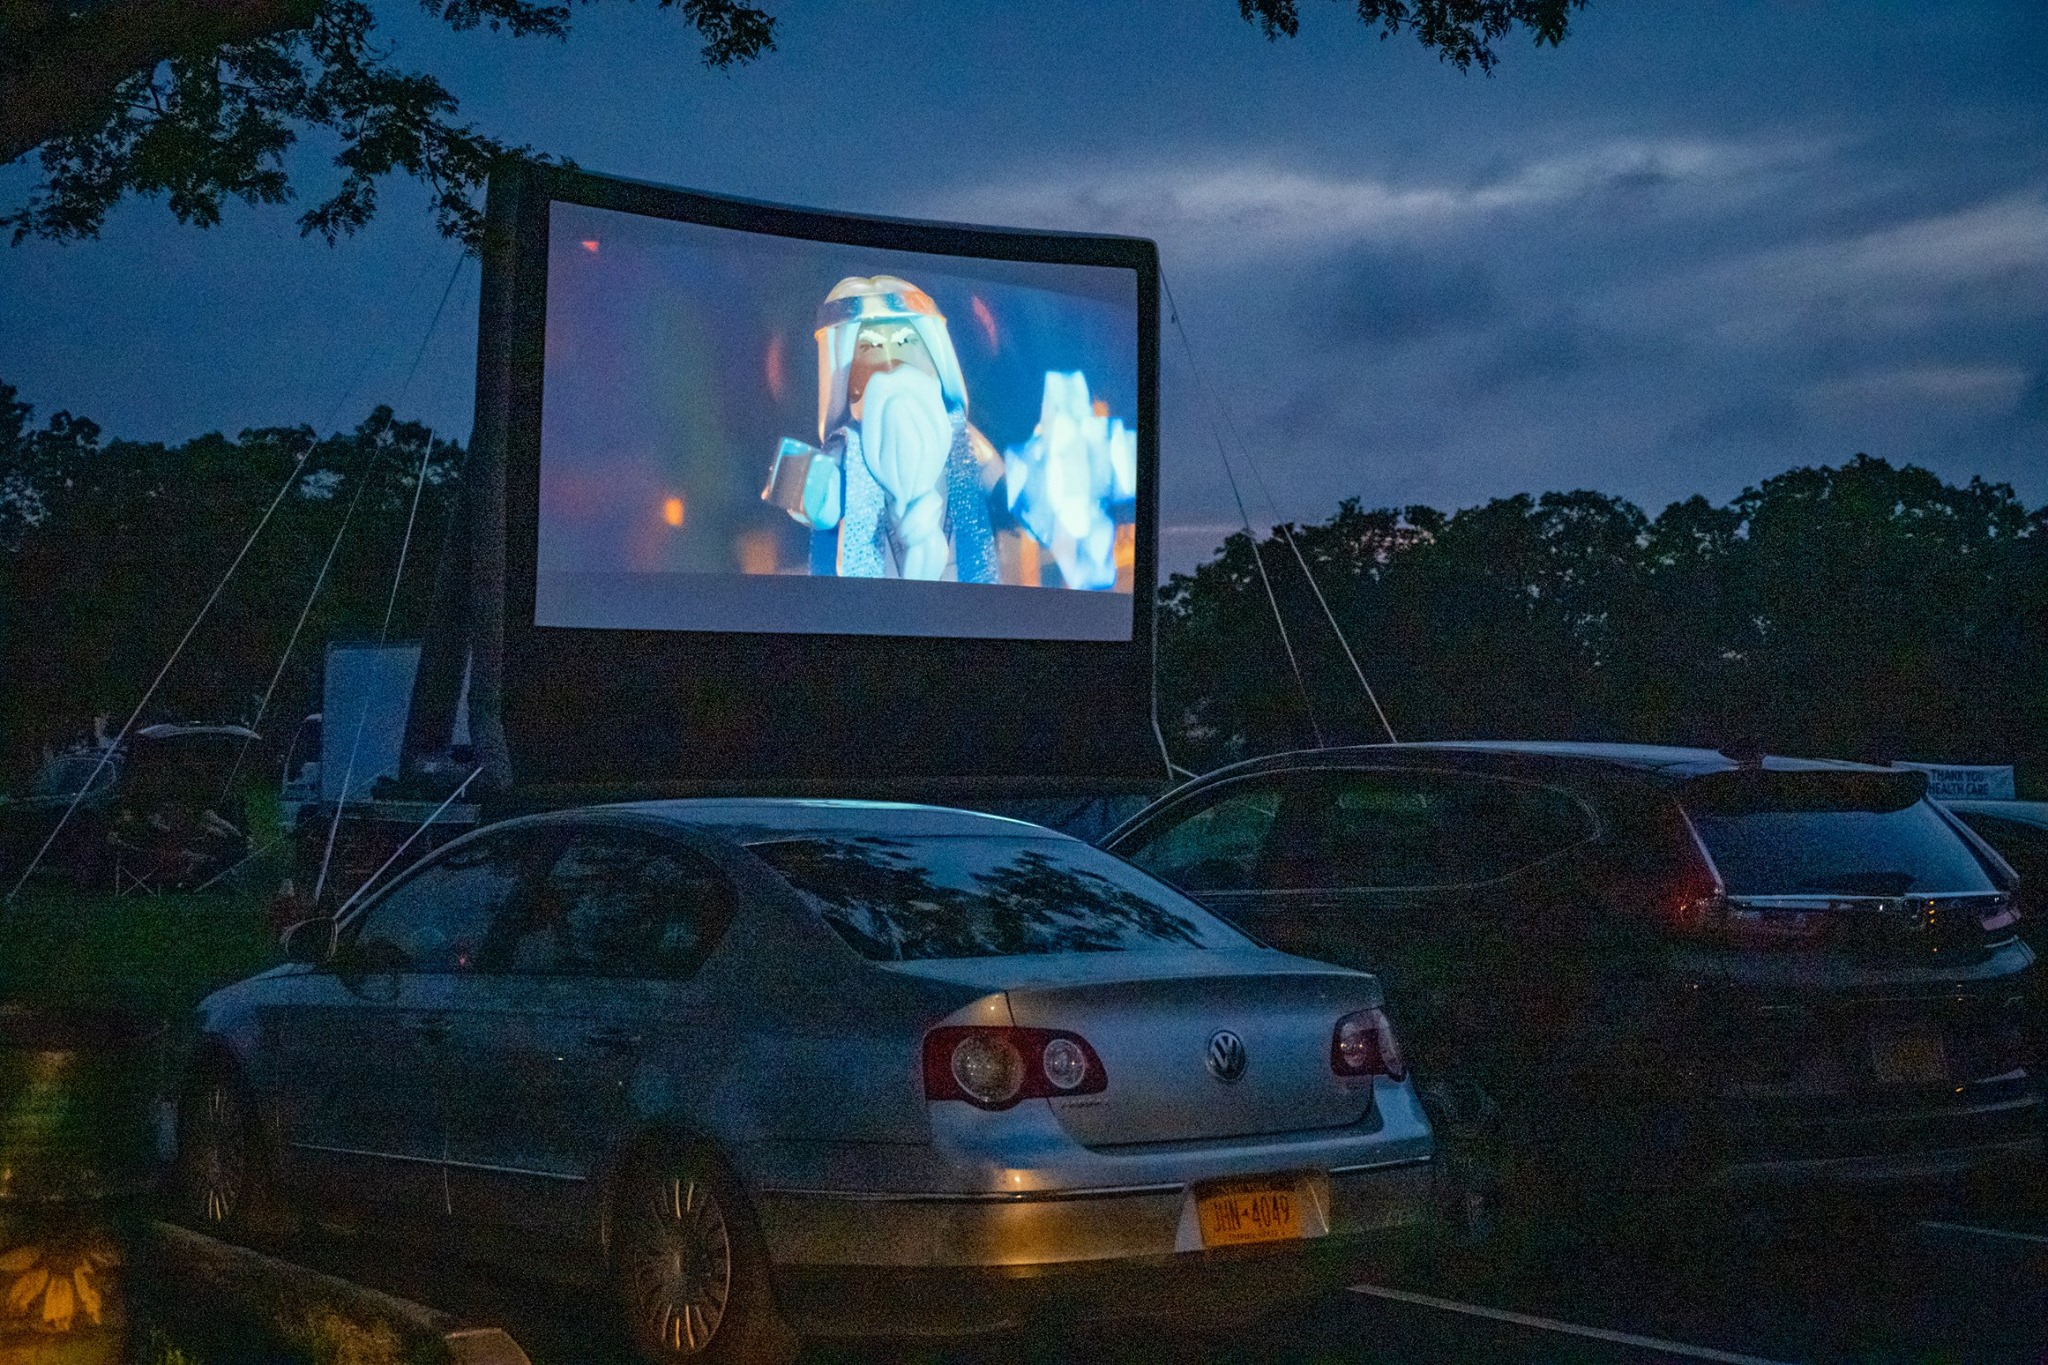 residents enjoy festivities at August 5th Monday Drive-in movie   night